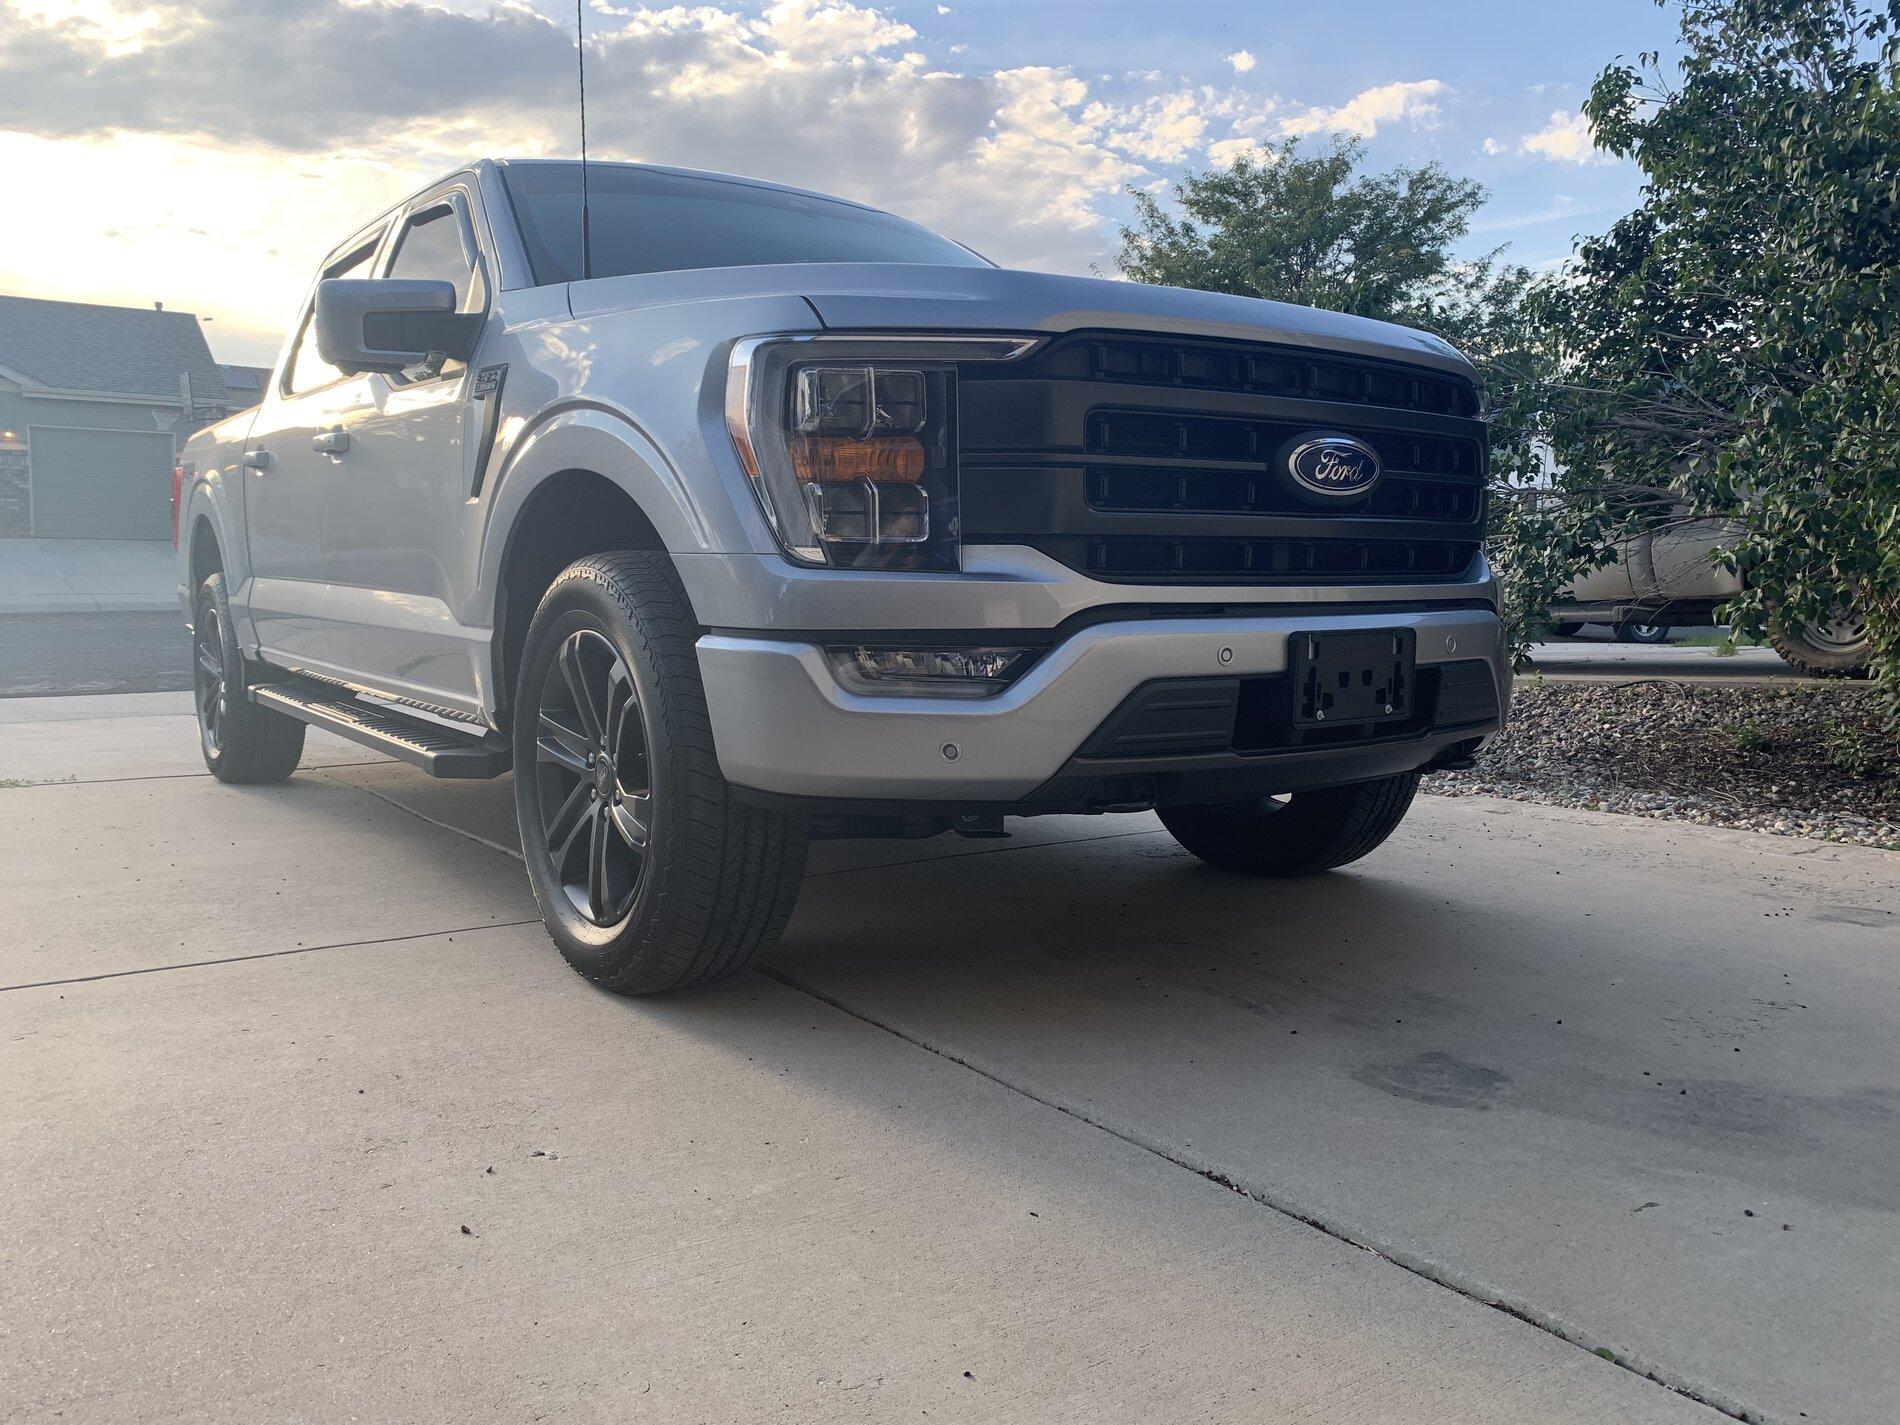 TopCoat F11 - Ford F150 Forum - Community of Ford Truck Fans